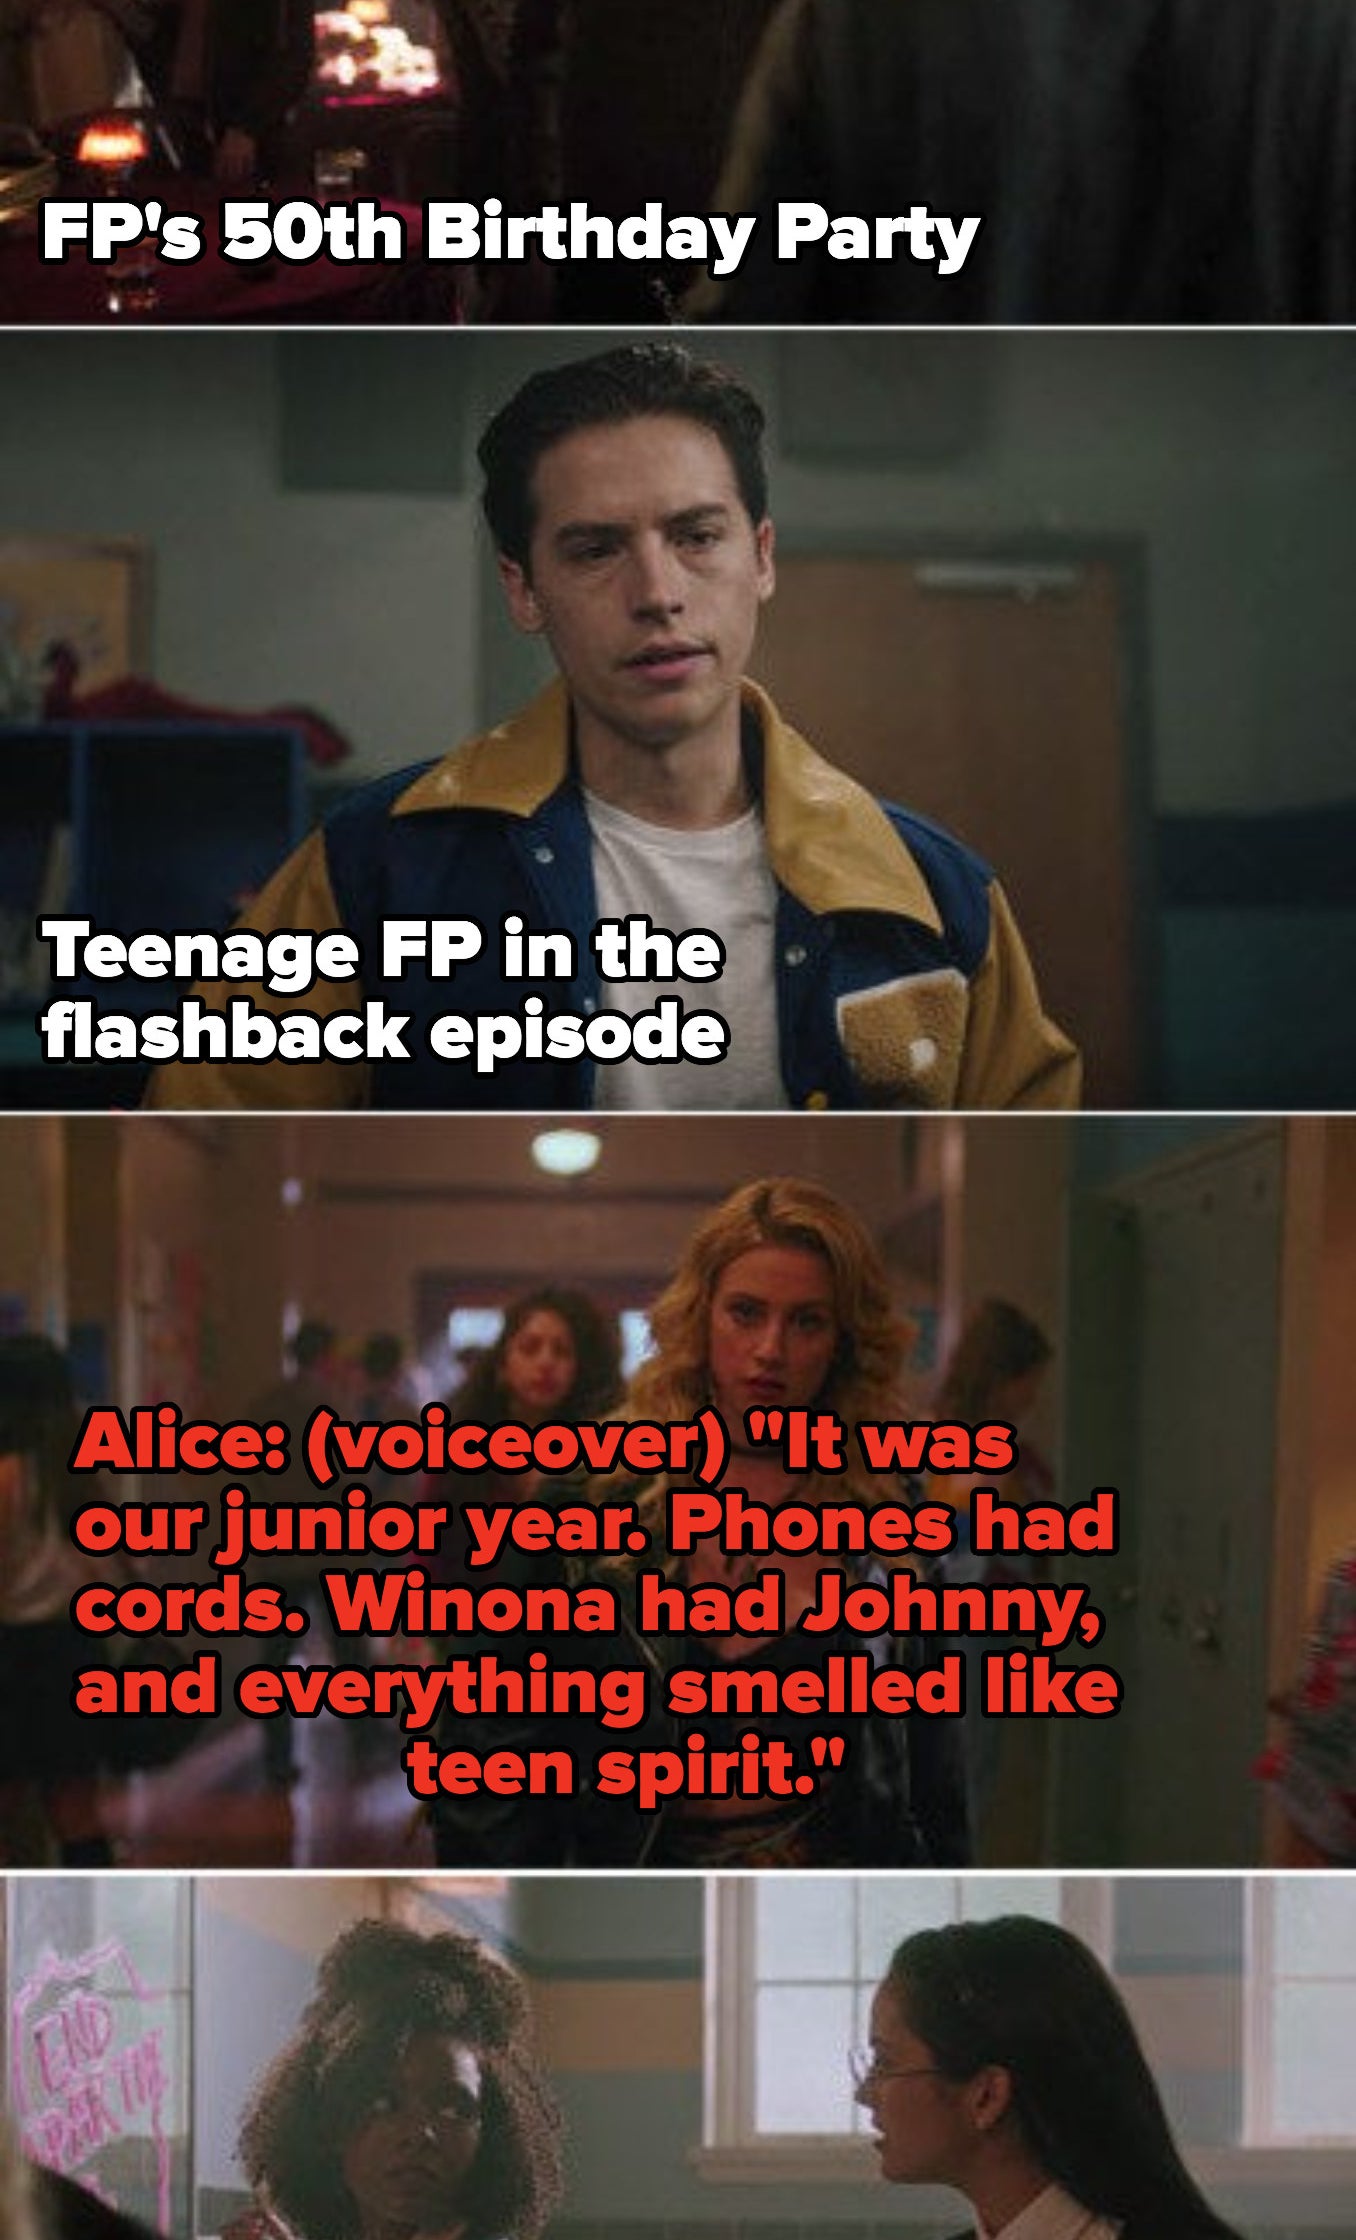 FP at his 50th birthday party and FP as a high school junior in the '90s flashback episode